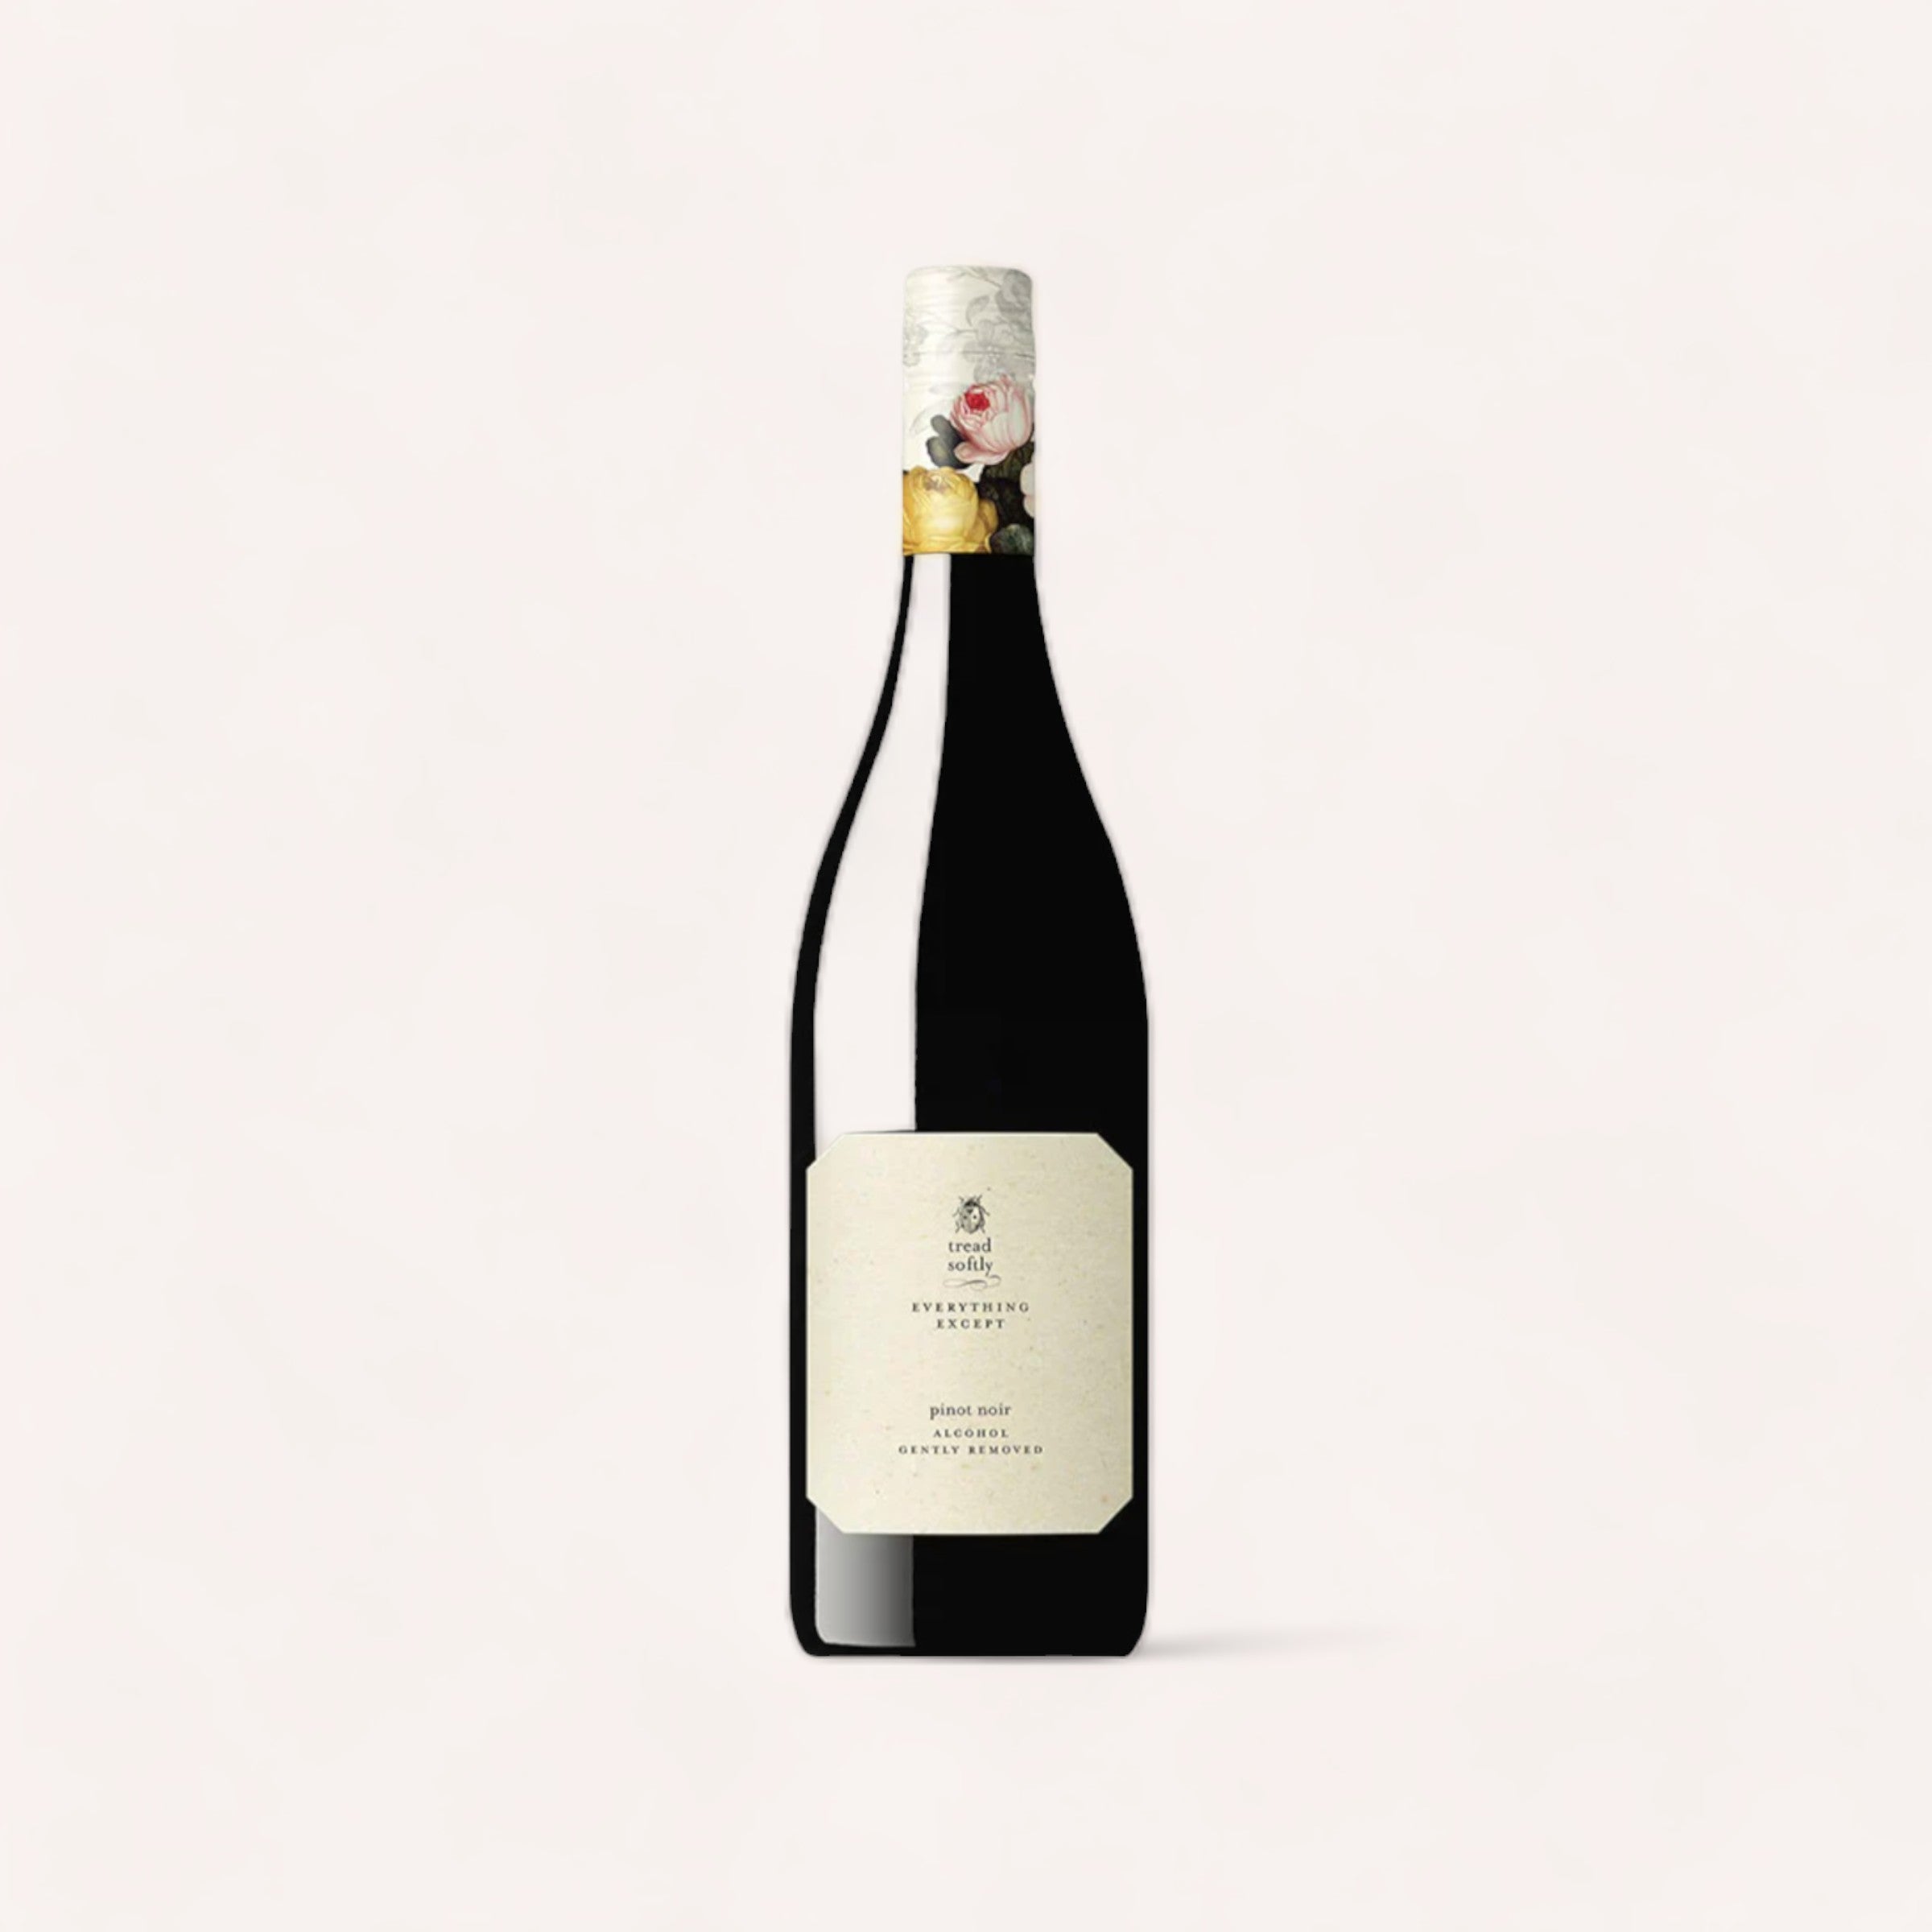 An elegant bottle of Non-Alcoholic Pinot Noir by Tread Softly with a vintage label, sealed with a traditional cork and foil against a clean, neutral background.